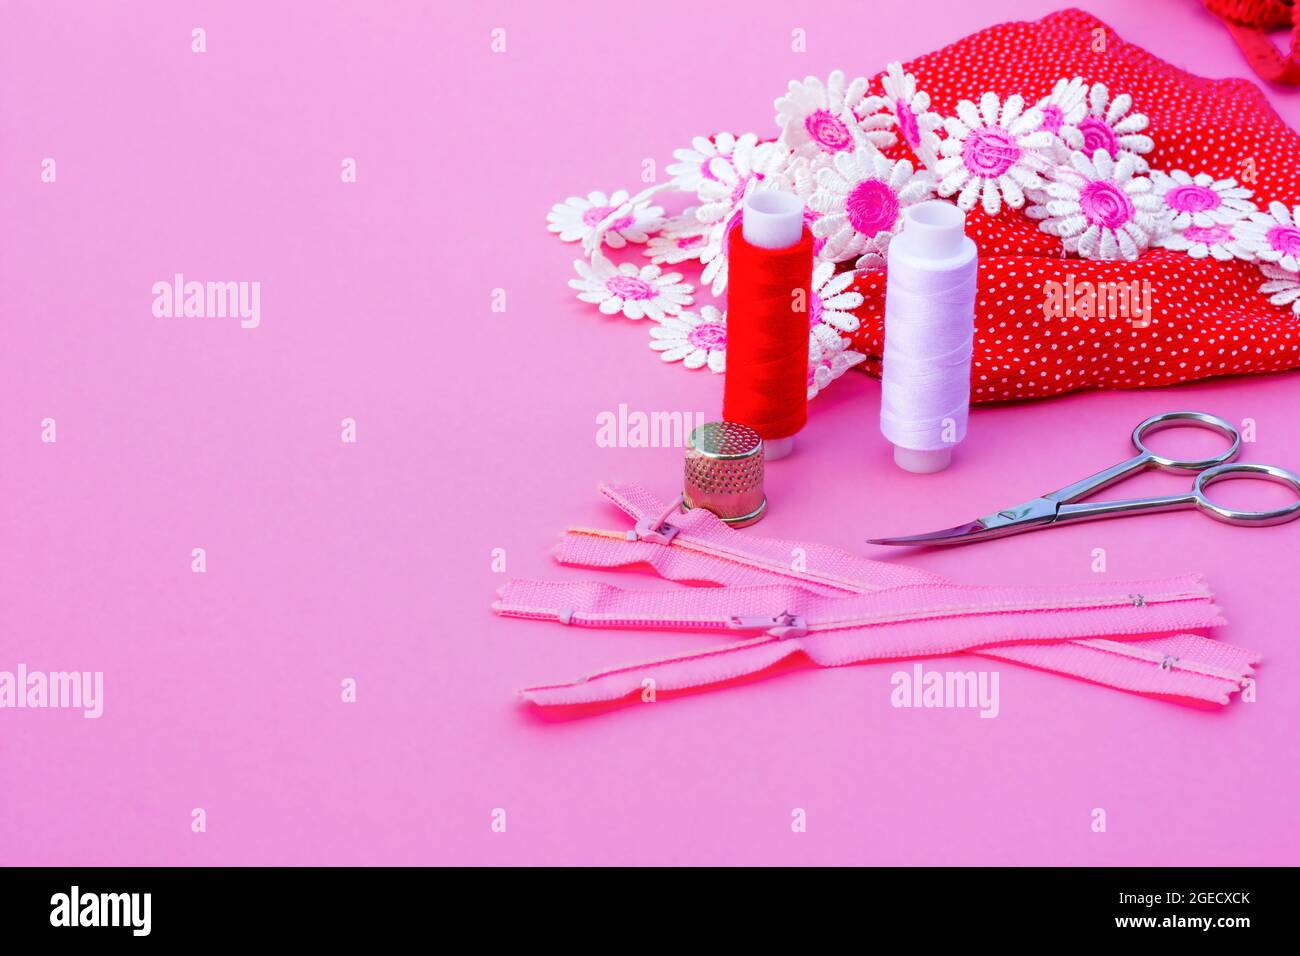 sewing accessories for crafts Stock Photo